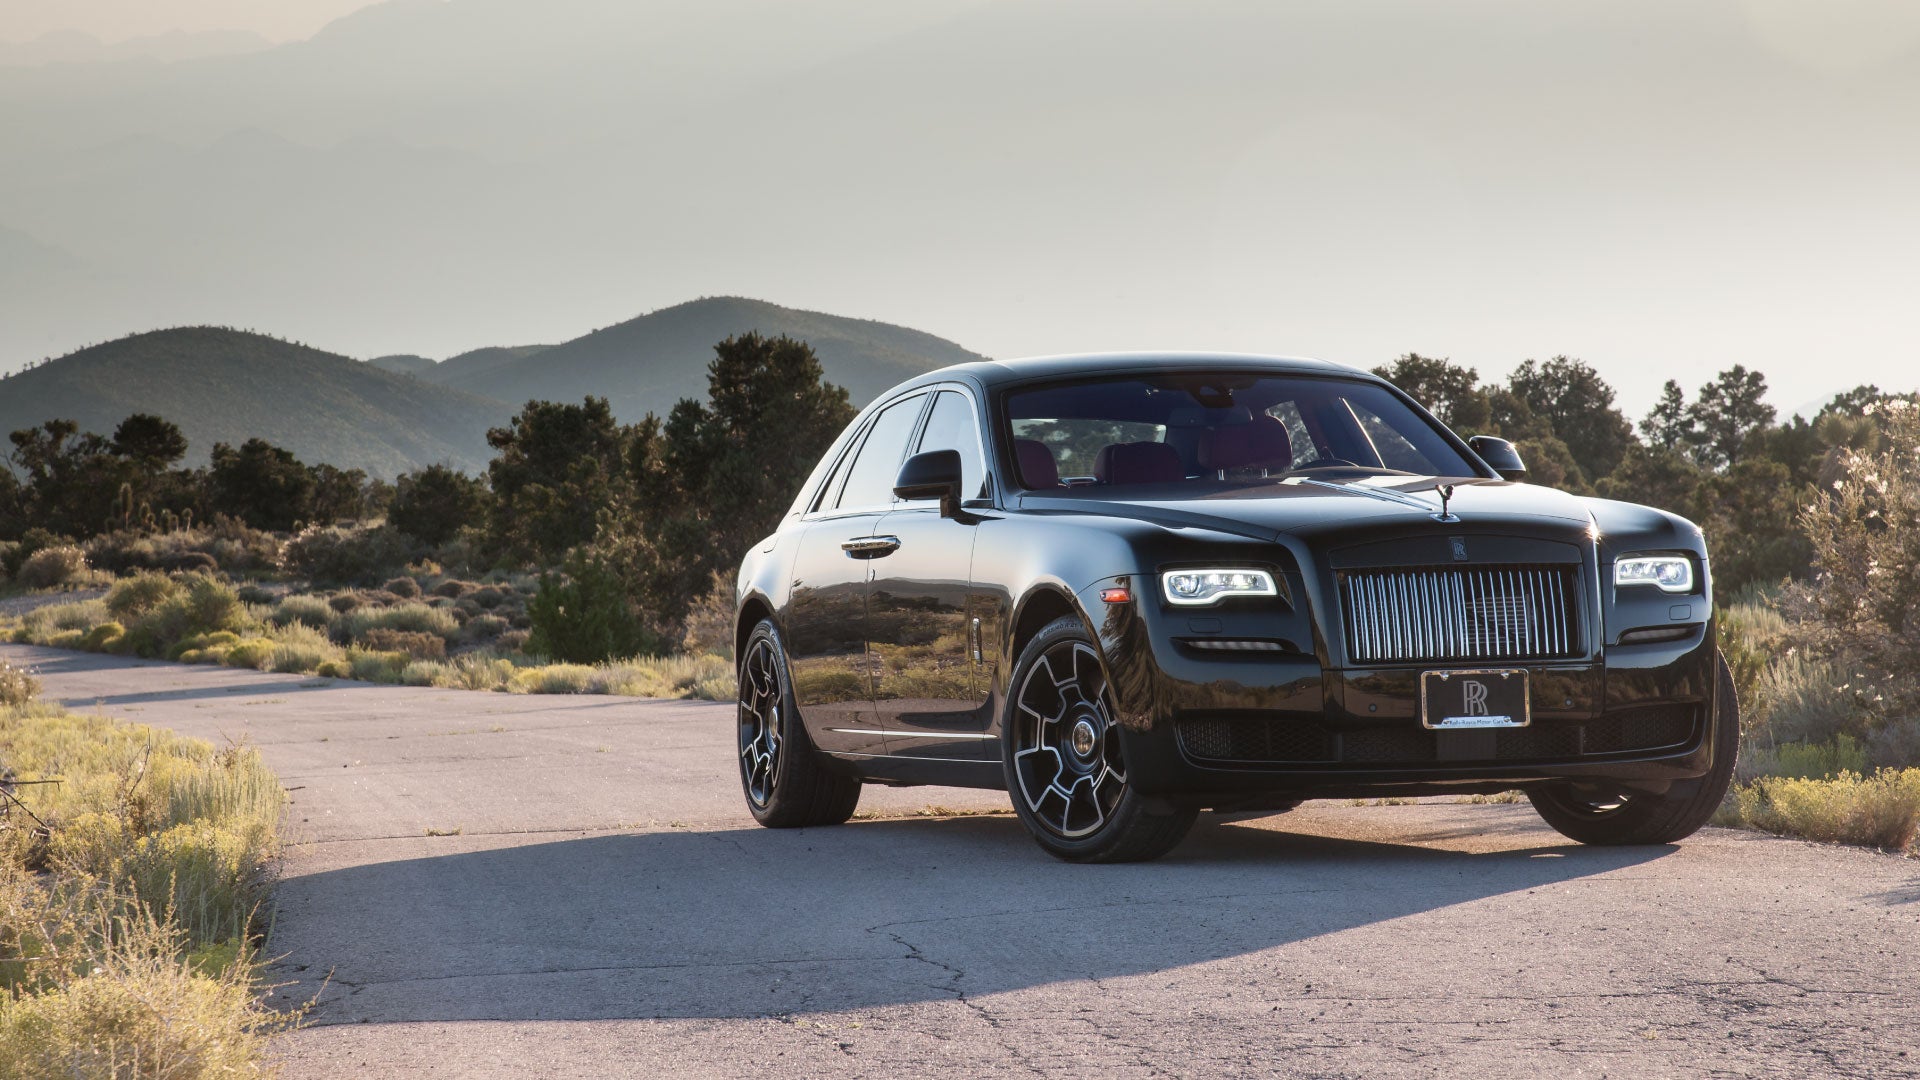 Used 2019 RollsRoyce Ghost For Sale at McGovern Hyundai Route 93  VIN  SCA664S53KUX54635